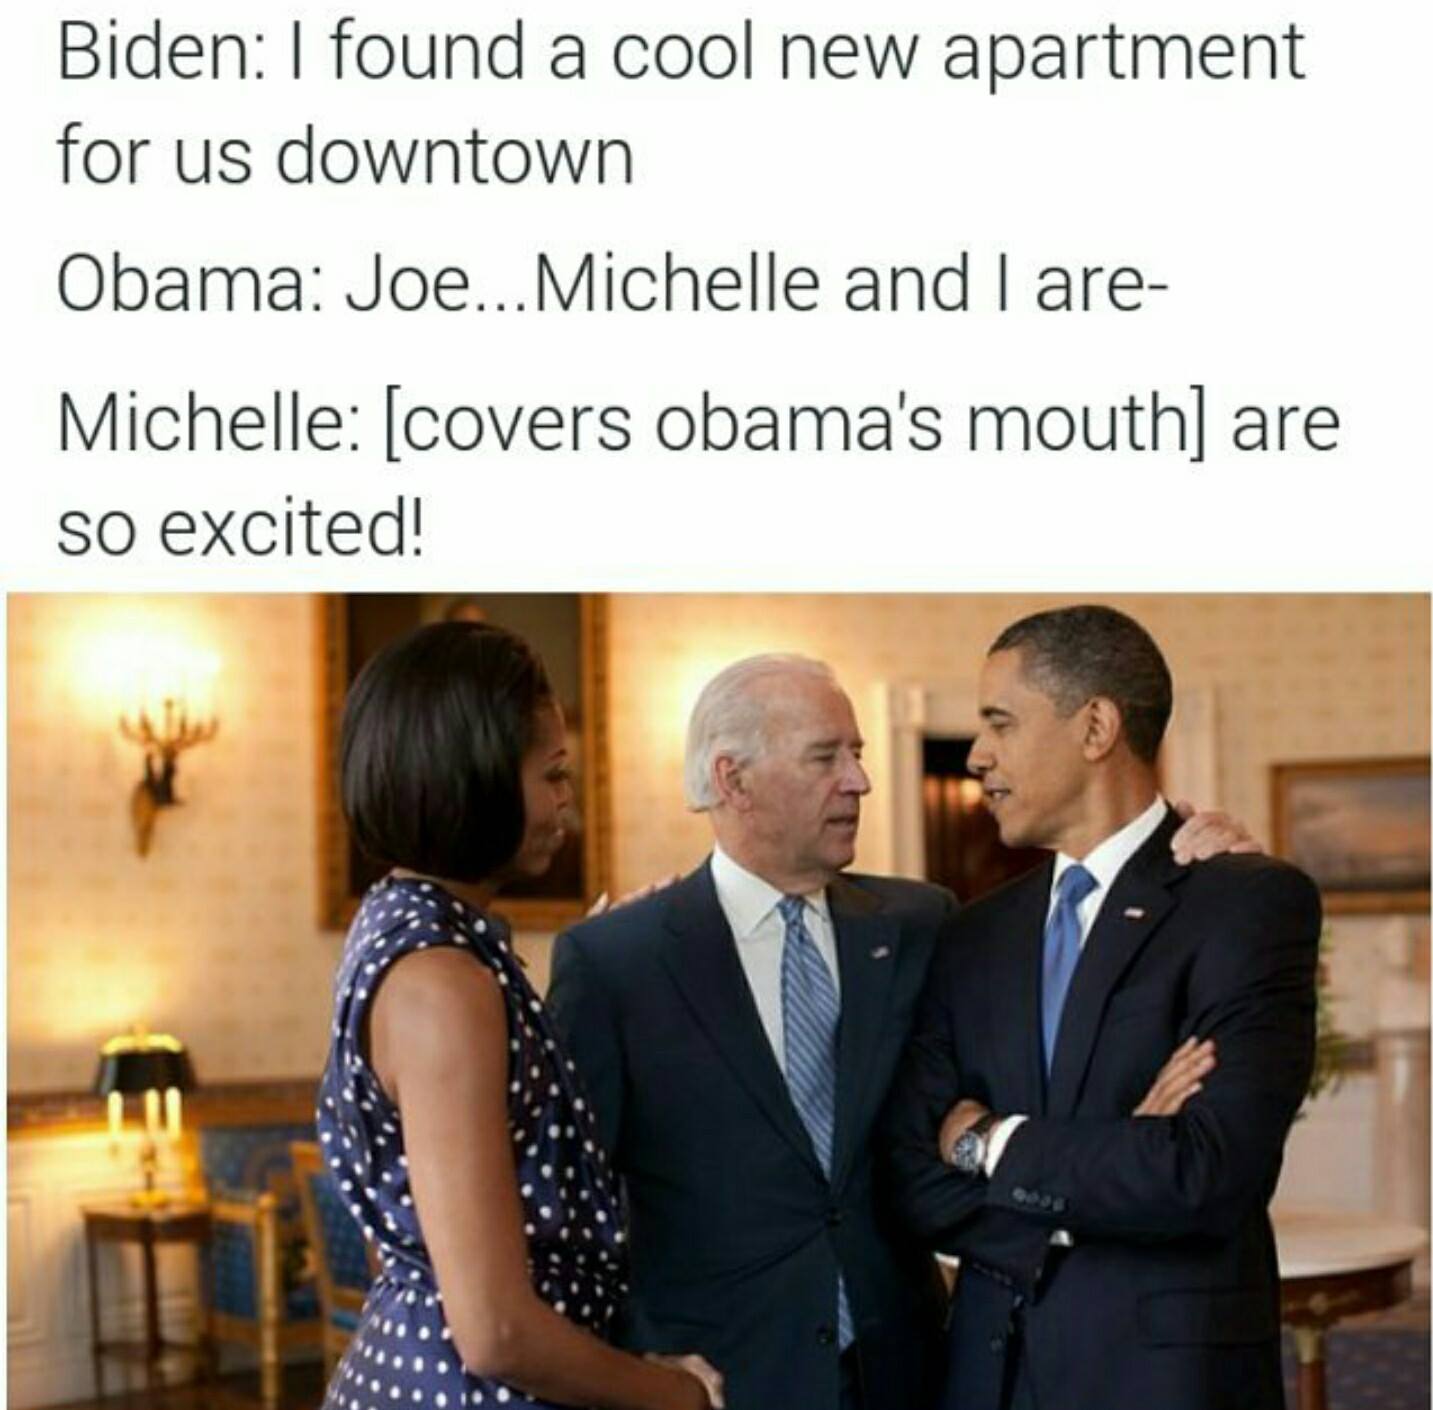 best biden obama memes - Biden I found a cool new apartment for us downtown Obama Joe... Michelle and I are Michelle covers obama's mouth are so excited!